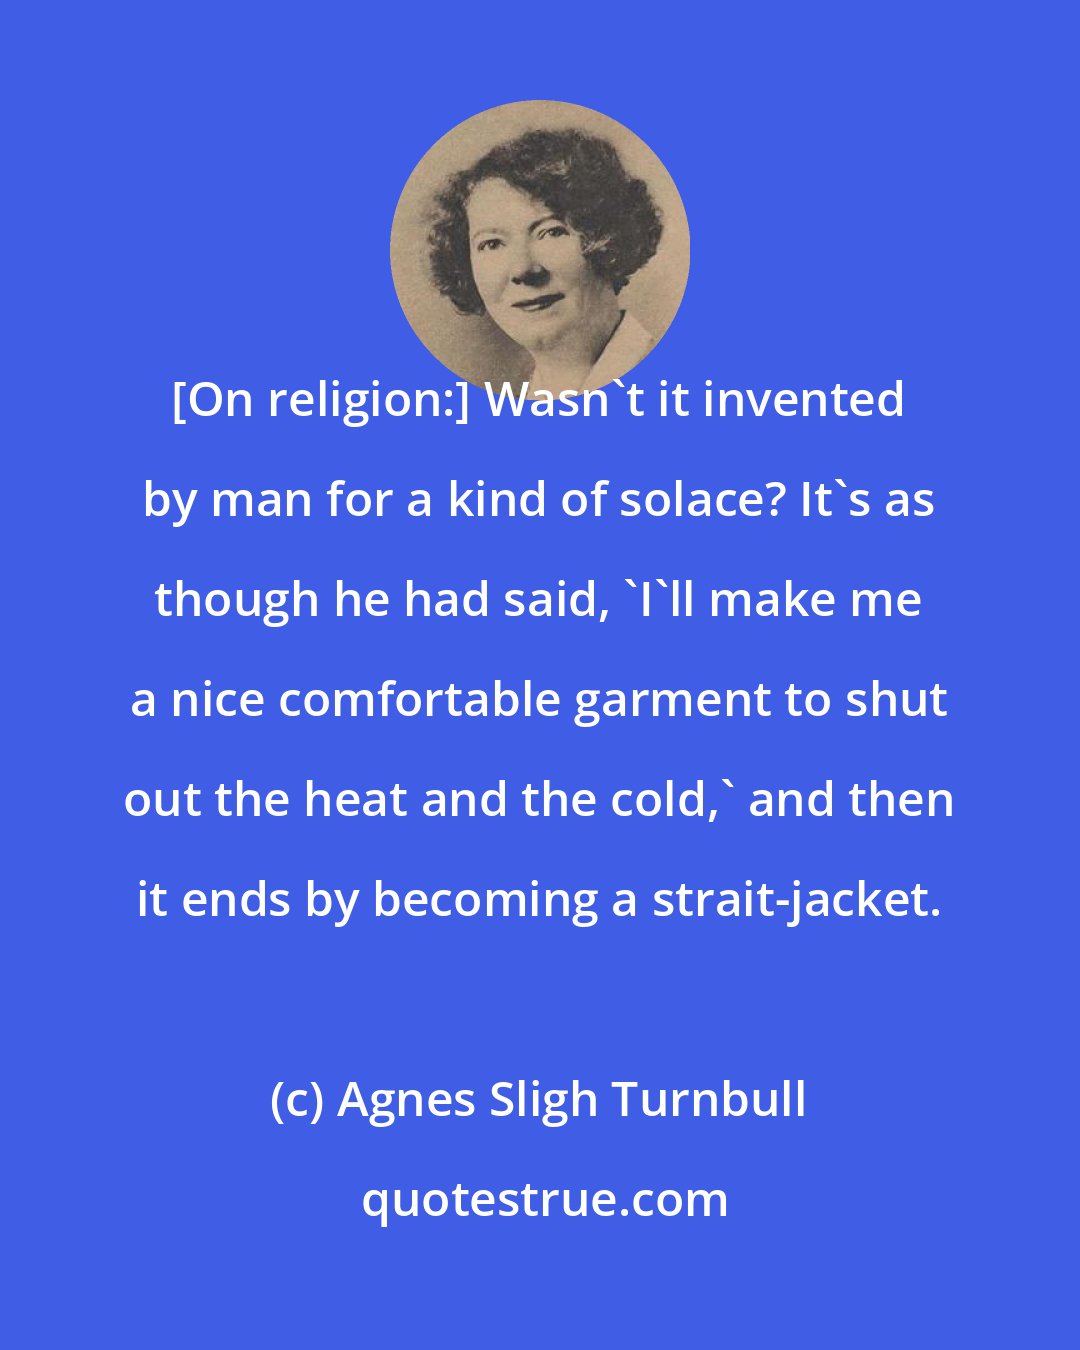 Agnes Sligh Turnbull: [On religion:] Wasn't it invented by man for a kind of solace? It's as though he had said, 'I'll make me a nice comfortable garment to shut out the heat and the cold,' and then it ends by becoming a strait-jacket.